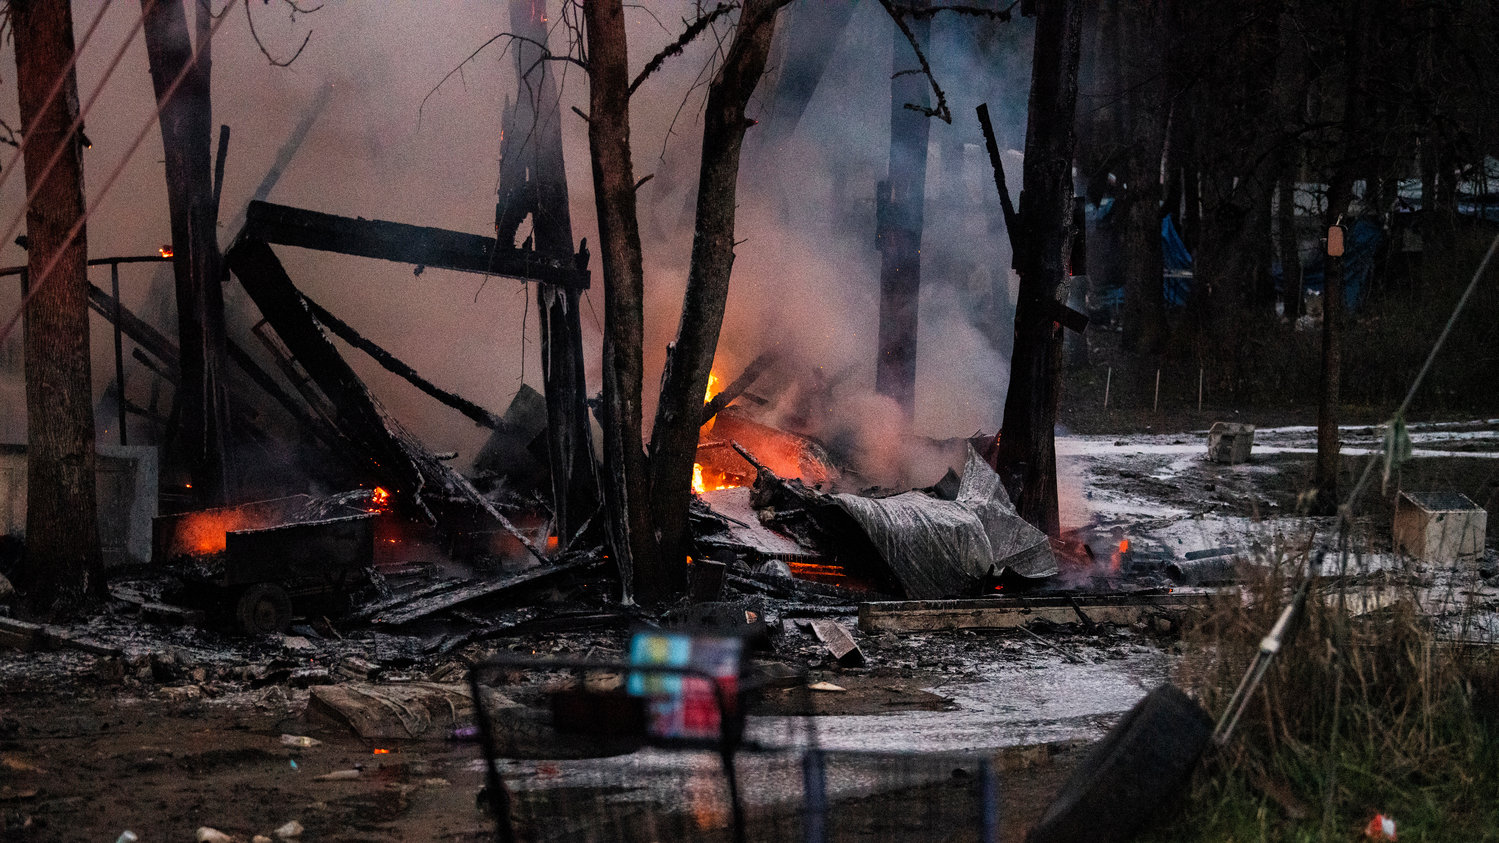 Flames doused in foam ignite debris at the end of Eckerson Road in Centralia near Blakeslee Junction where a column of smoke and heat rose from a structure inside a homeless encampment Tuesday, March 28, 2023.